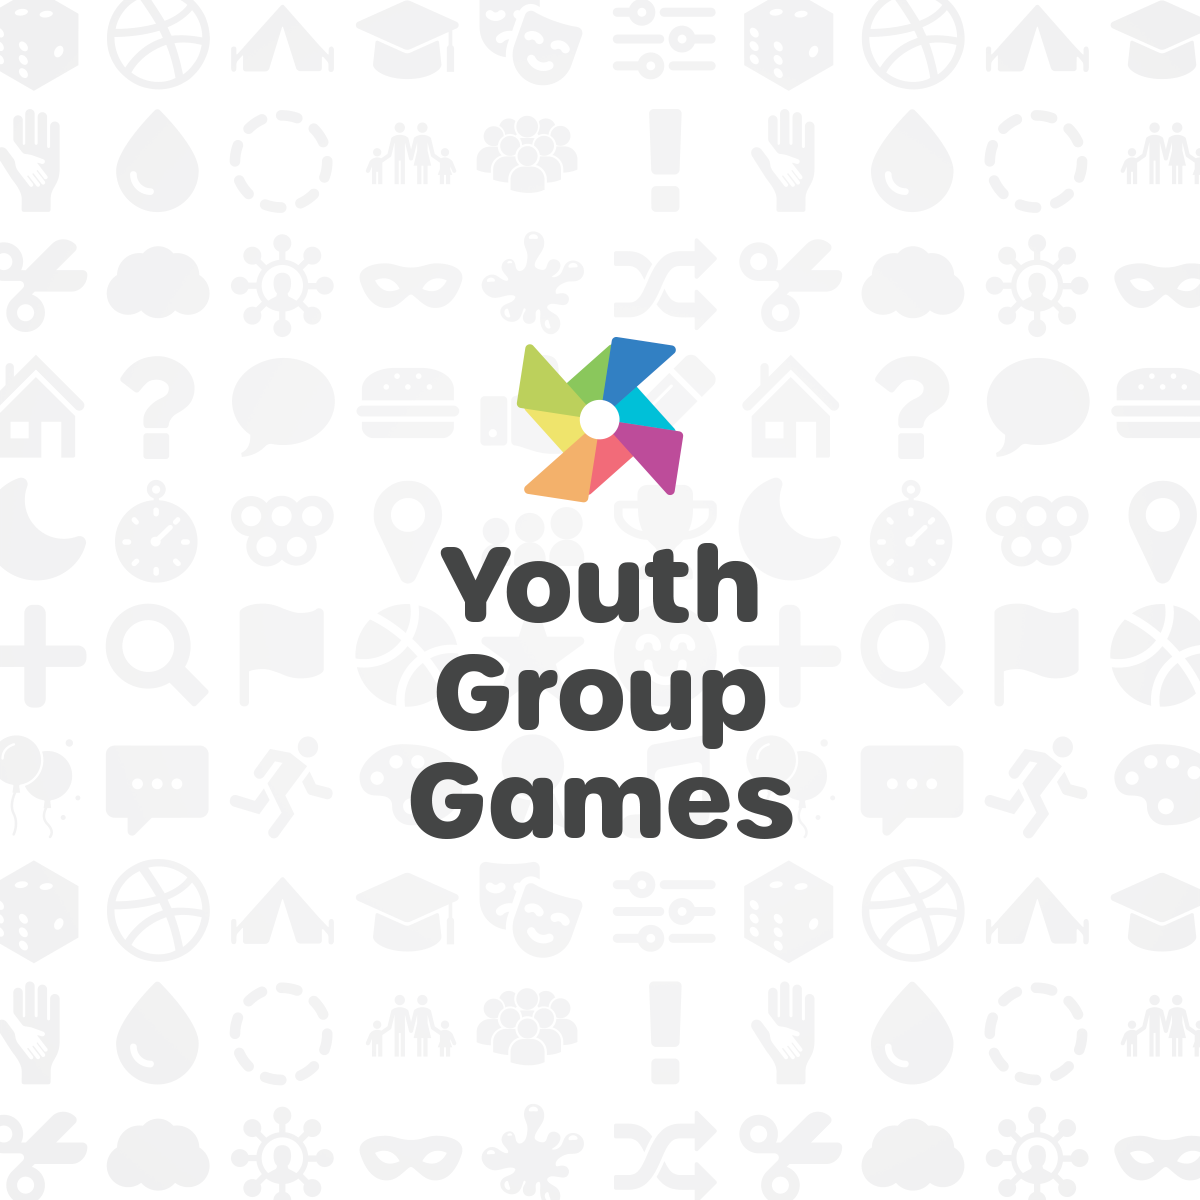 20 Fun Games for Virtual Youth Group or Small Group Meetings | Youth Group Games | Games, ideas, icebreakers, activities for youth groups, youth ministry and churches.